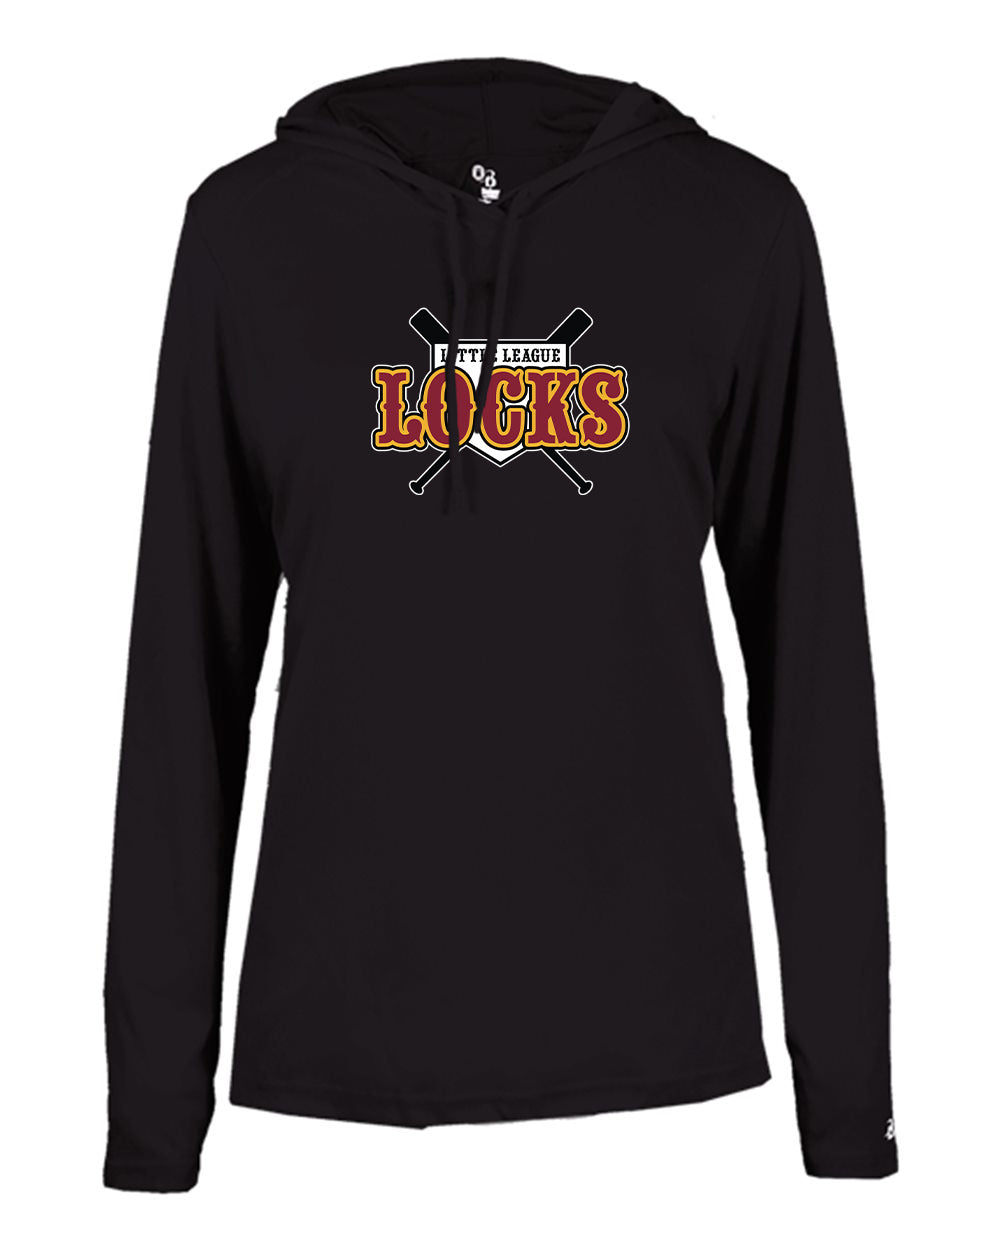 Locks LL Ladies Badger Hooded LS T-shirt "Classic" - 4165 (color options available)